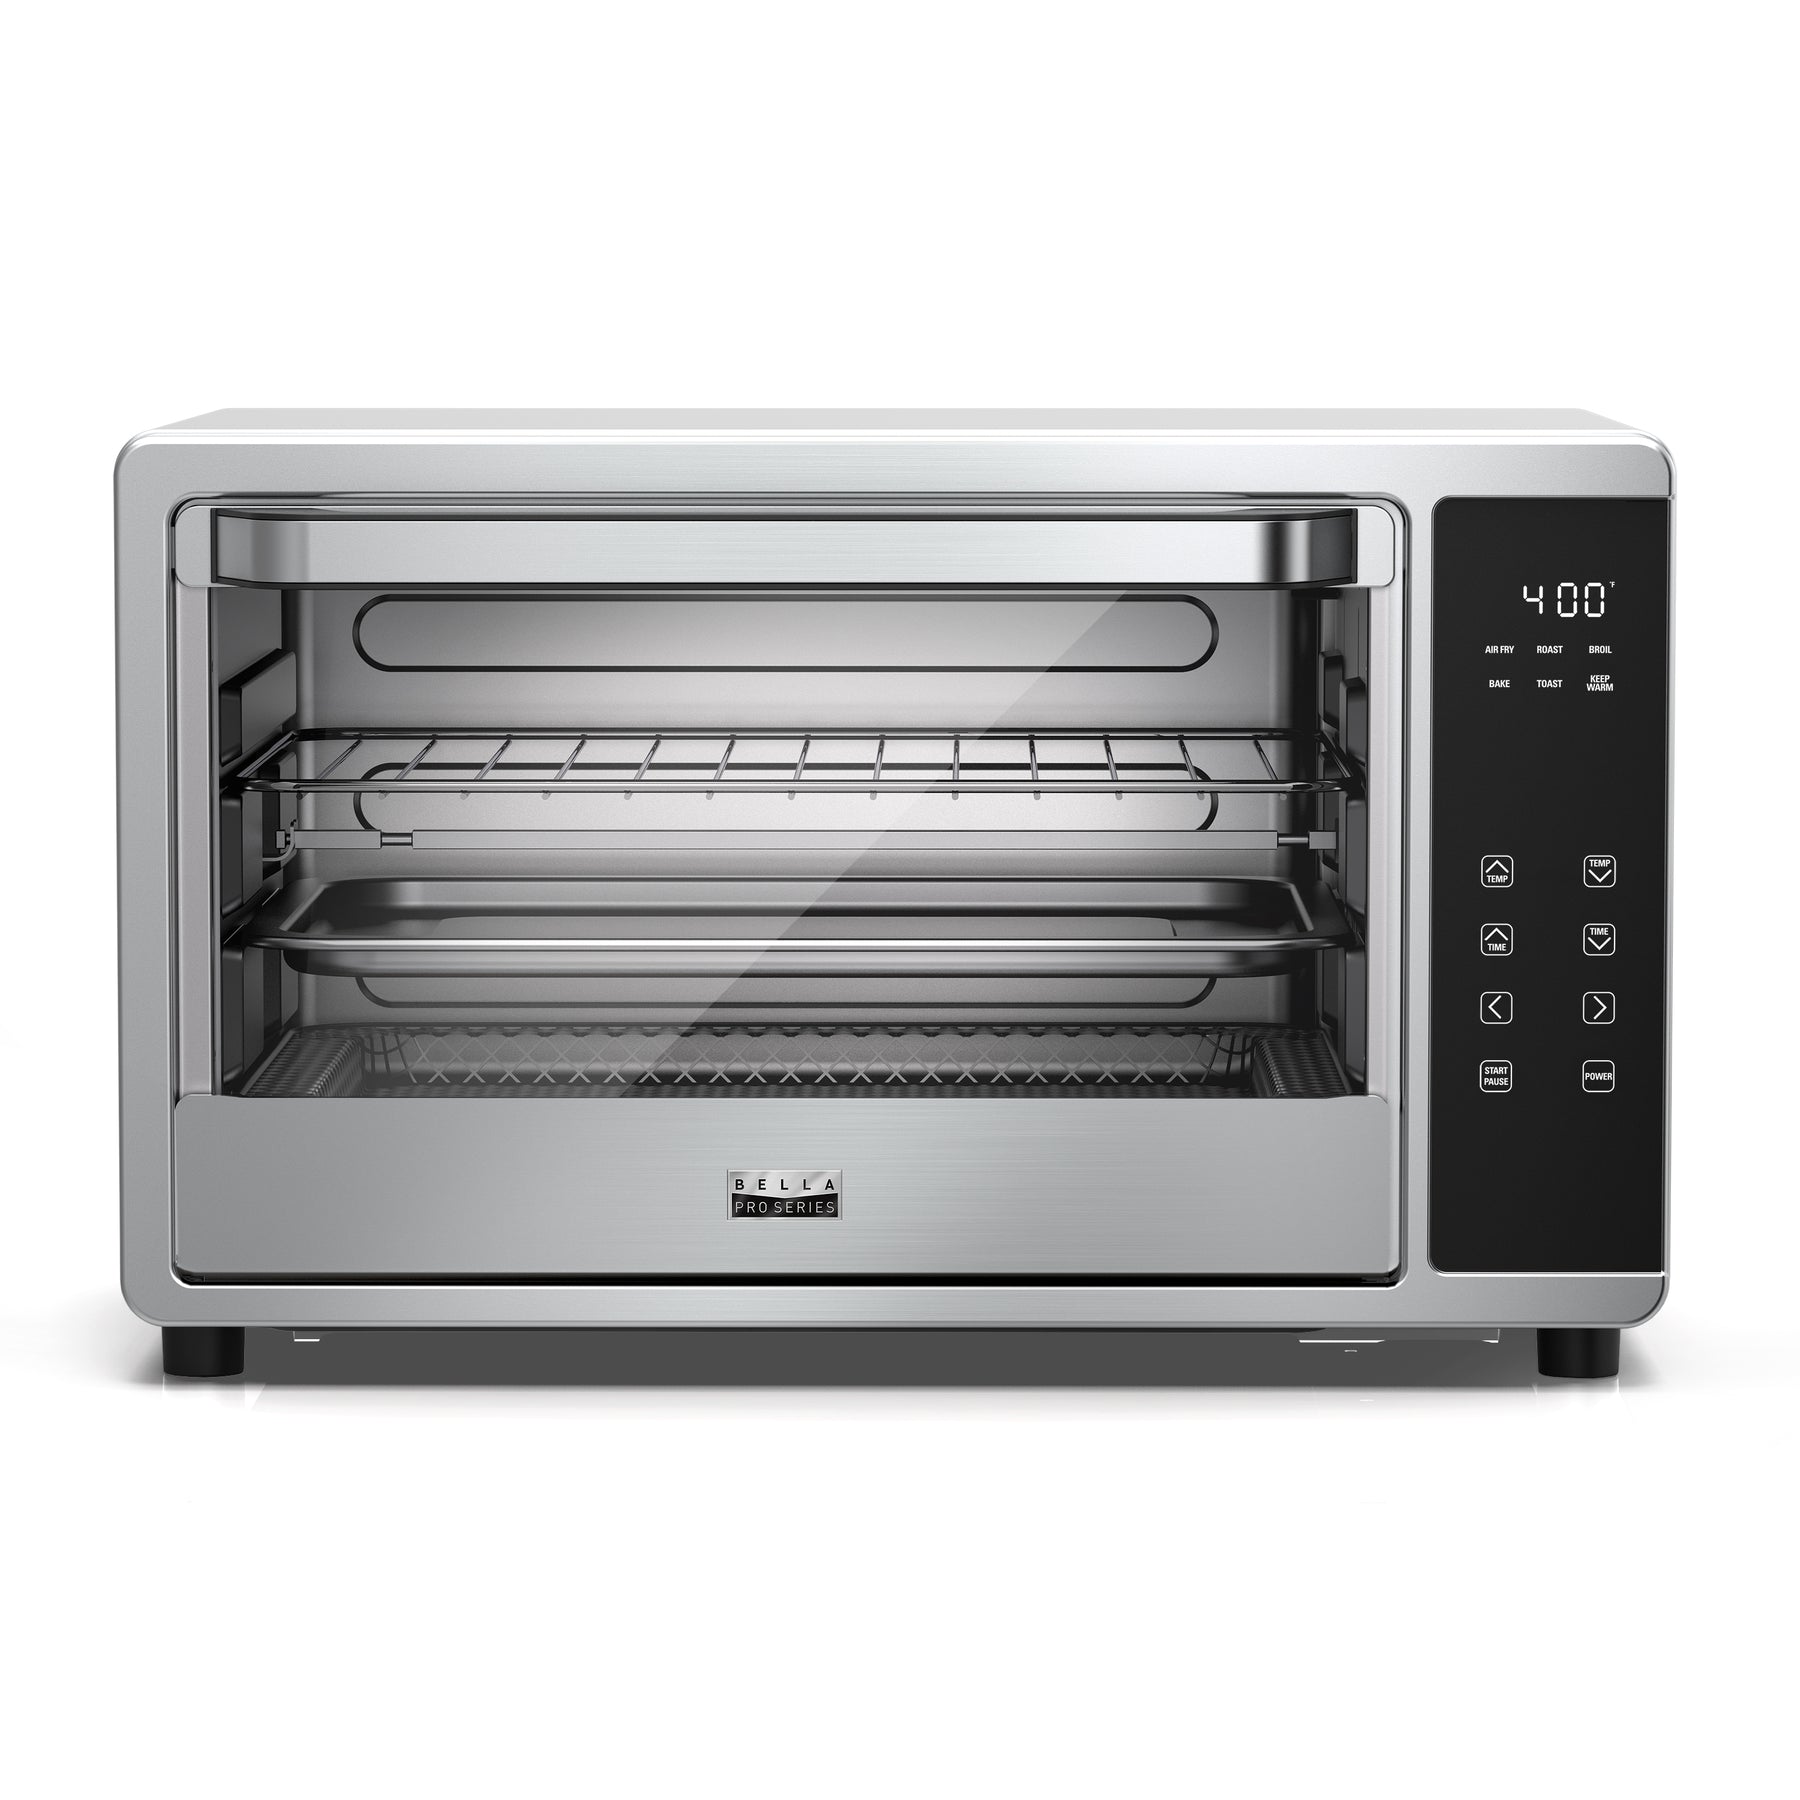 KitchenSmith by Bella Toaster Oven - Stainless Steel